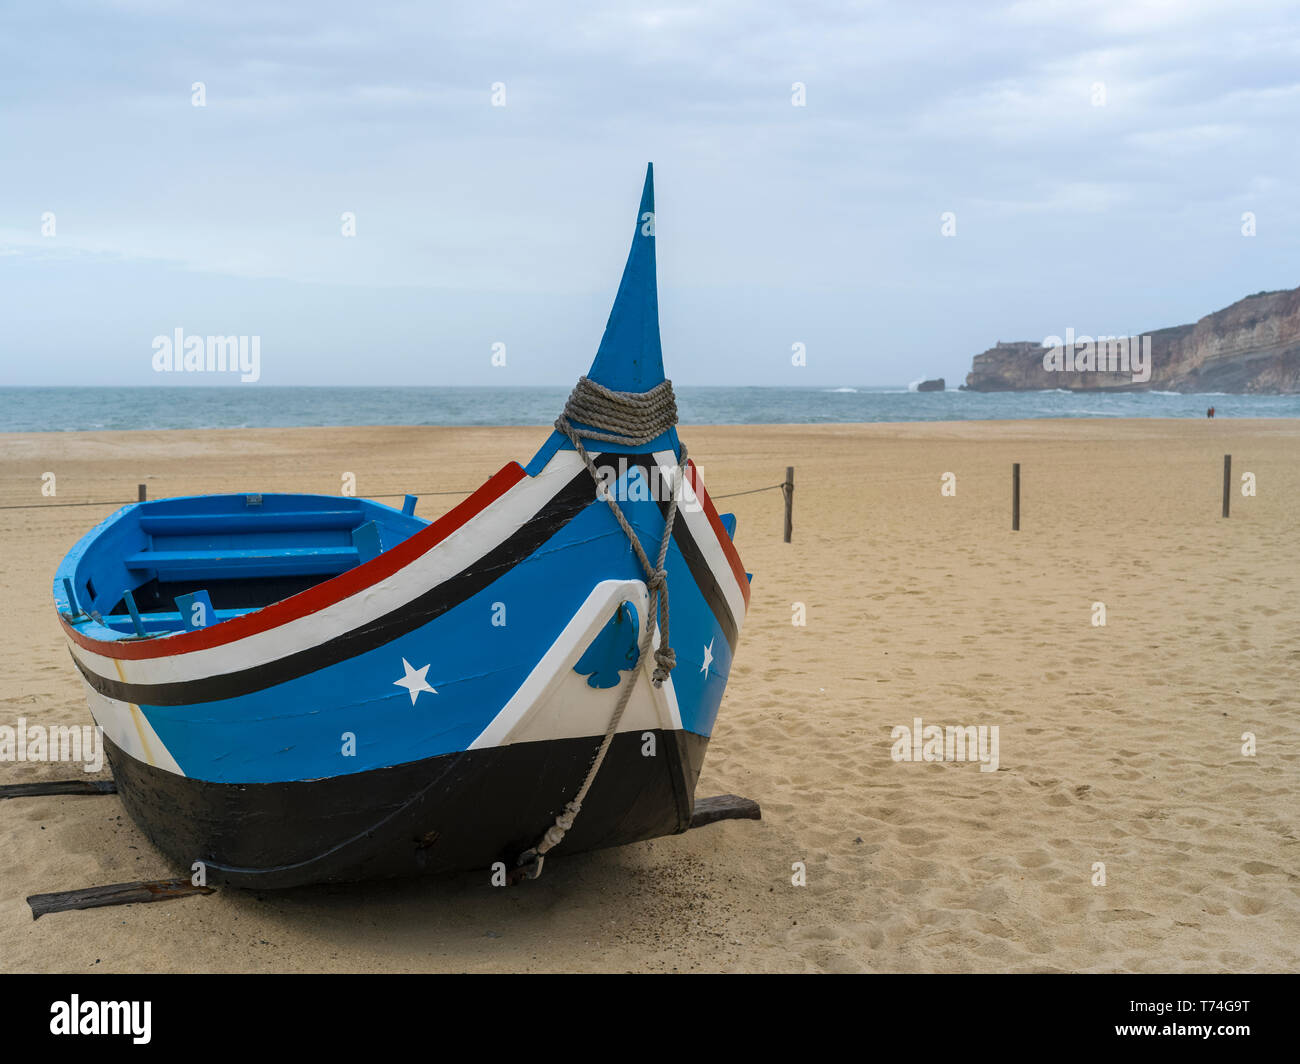 A colourful, wooden rowboat on the beach in the seaside resort town of Nazare; Nazare, Leiria District, Portugal Stock Photo